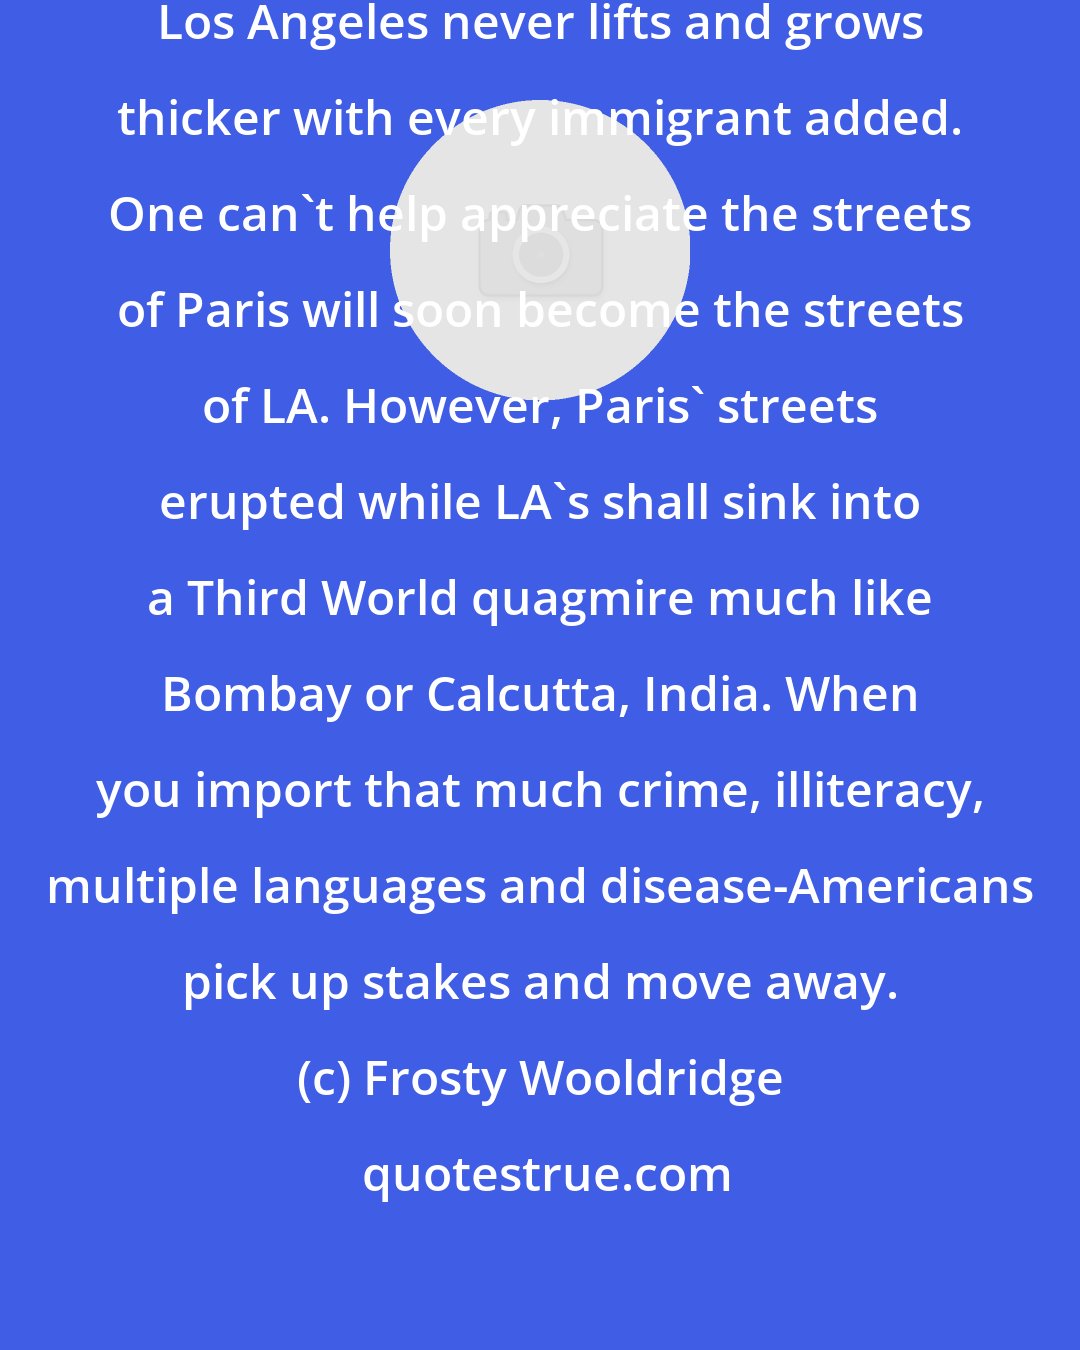 Frosty Wooldridge: The brown toxic cloud strangling Los Angeles never lifts and grows thicker with every immigrant added. One can't help appreciate the streets of Paris will soon become the streets of LA. However, Paris' streets erupted while LA's shall sink into a Third World quagmire much like Bombay or Calcutta, India. When you import that much crime, illiteracy, multiple languages and disease-Americans pick up stakes and move away.